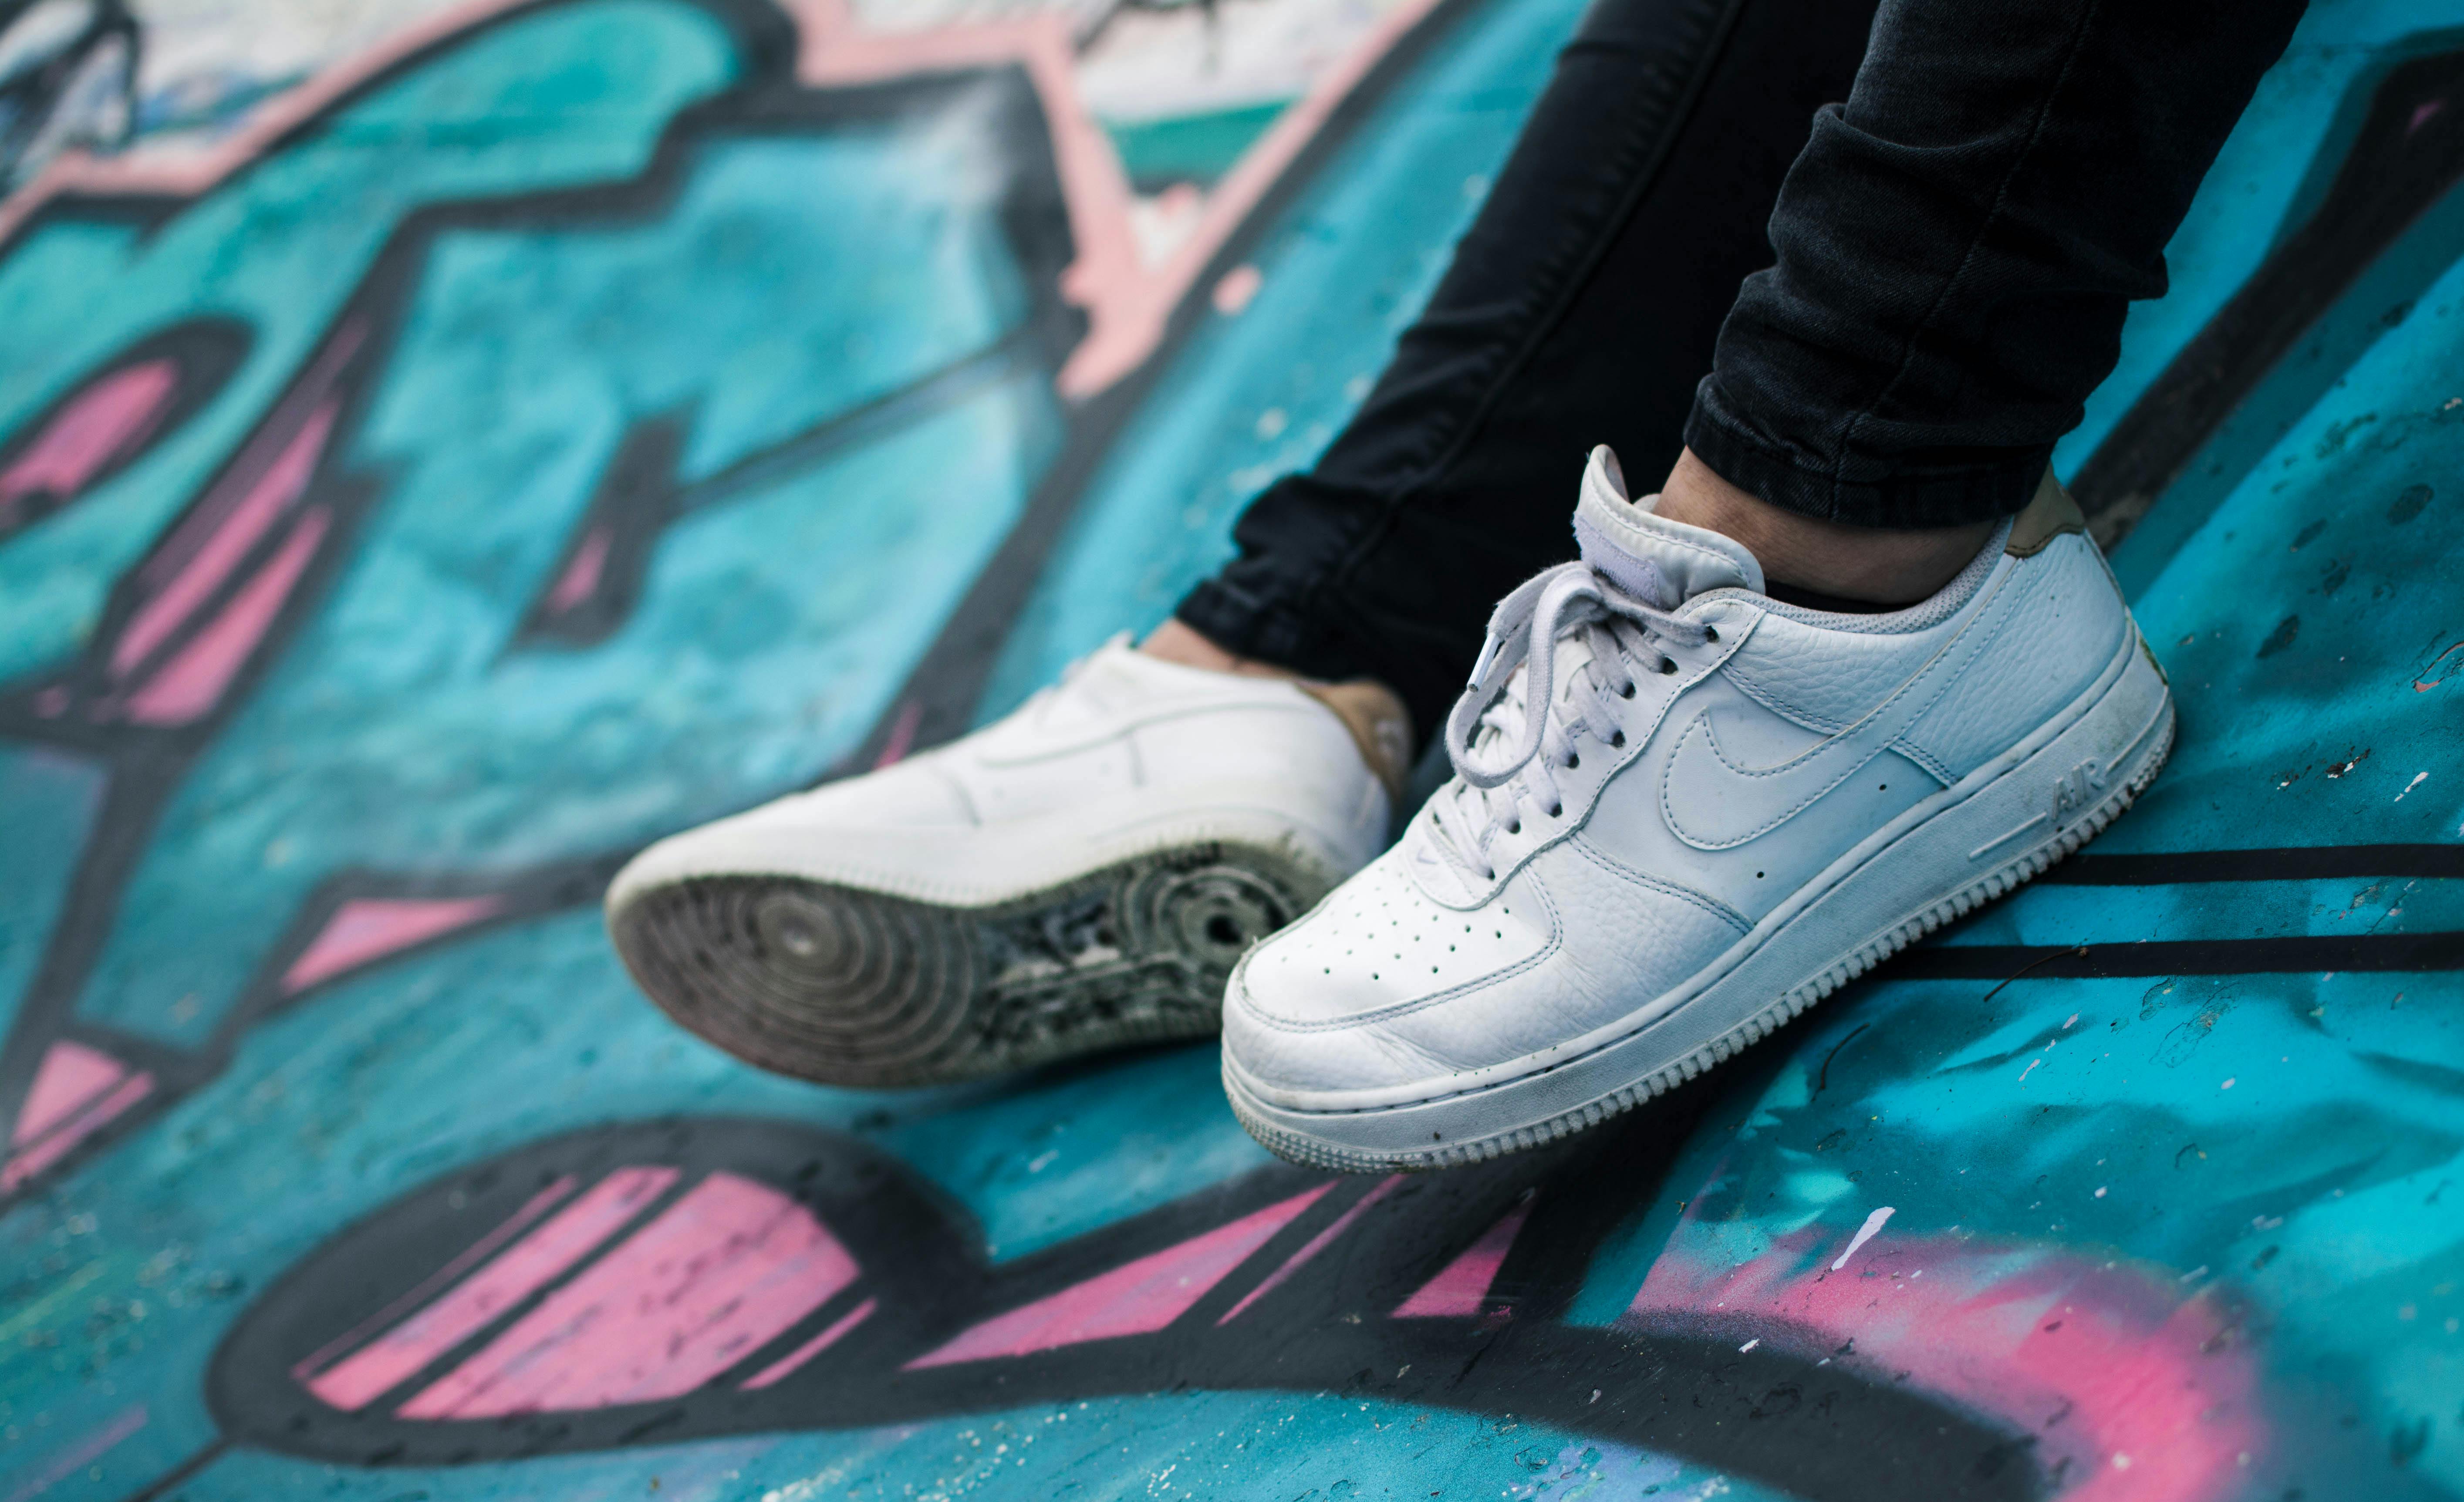 Nike Air Force 1 Photos, Download The BEST Free Nike Air Force 1